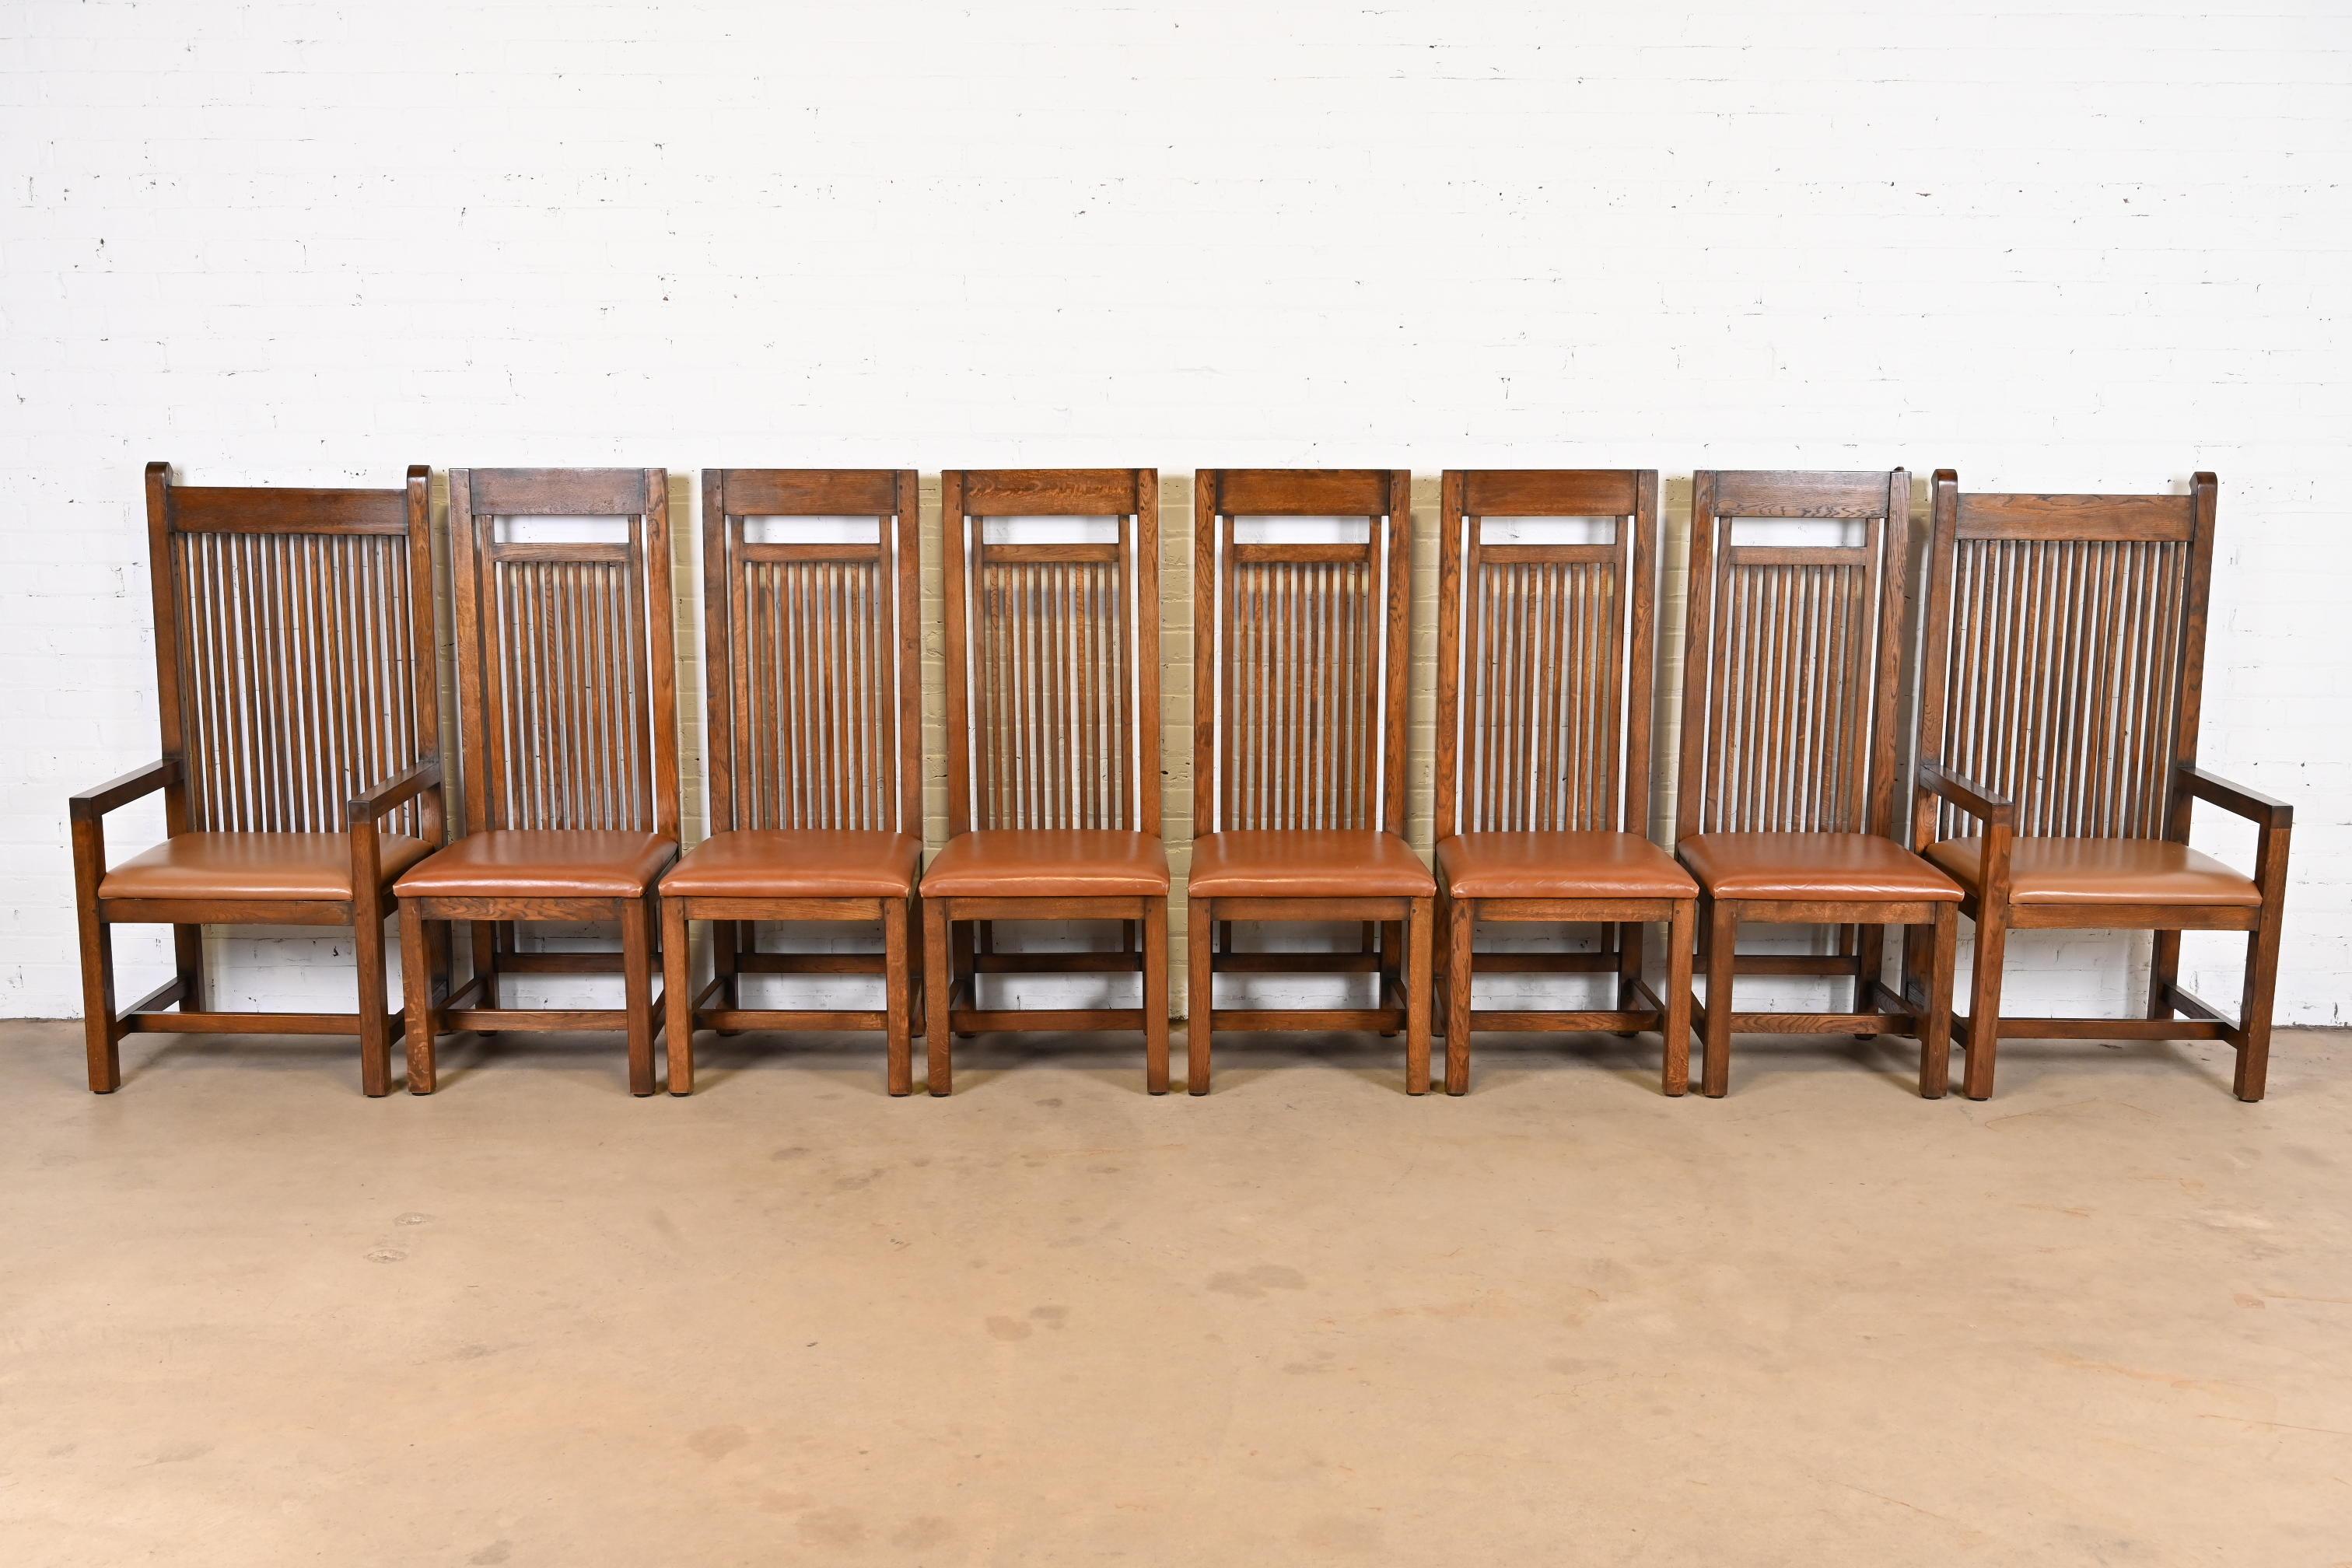 An exceptional set of eight Mission or Arts & Crafts style high back dining chairs

Designed by Frank Lloyd Wright for the Isabel Roberts House (1908)

These are very high quality reproductions. An example of the original is found at the